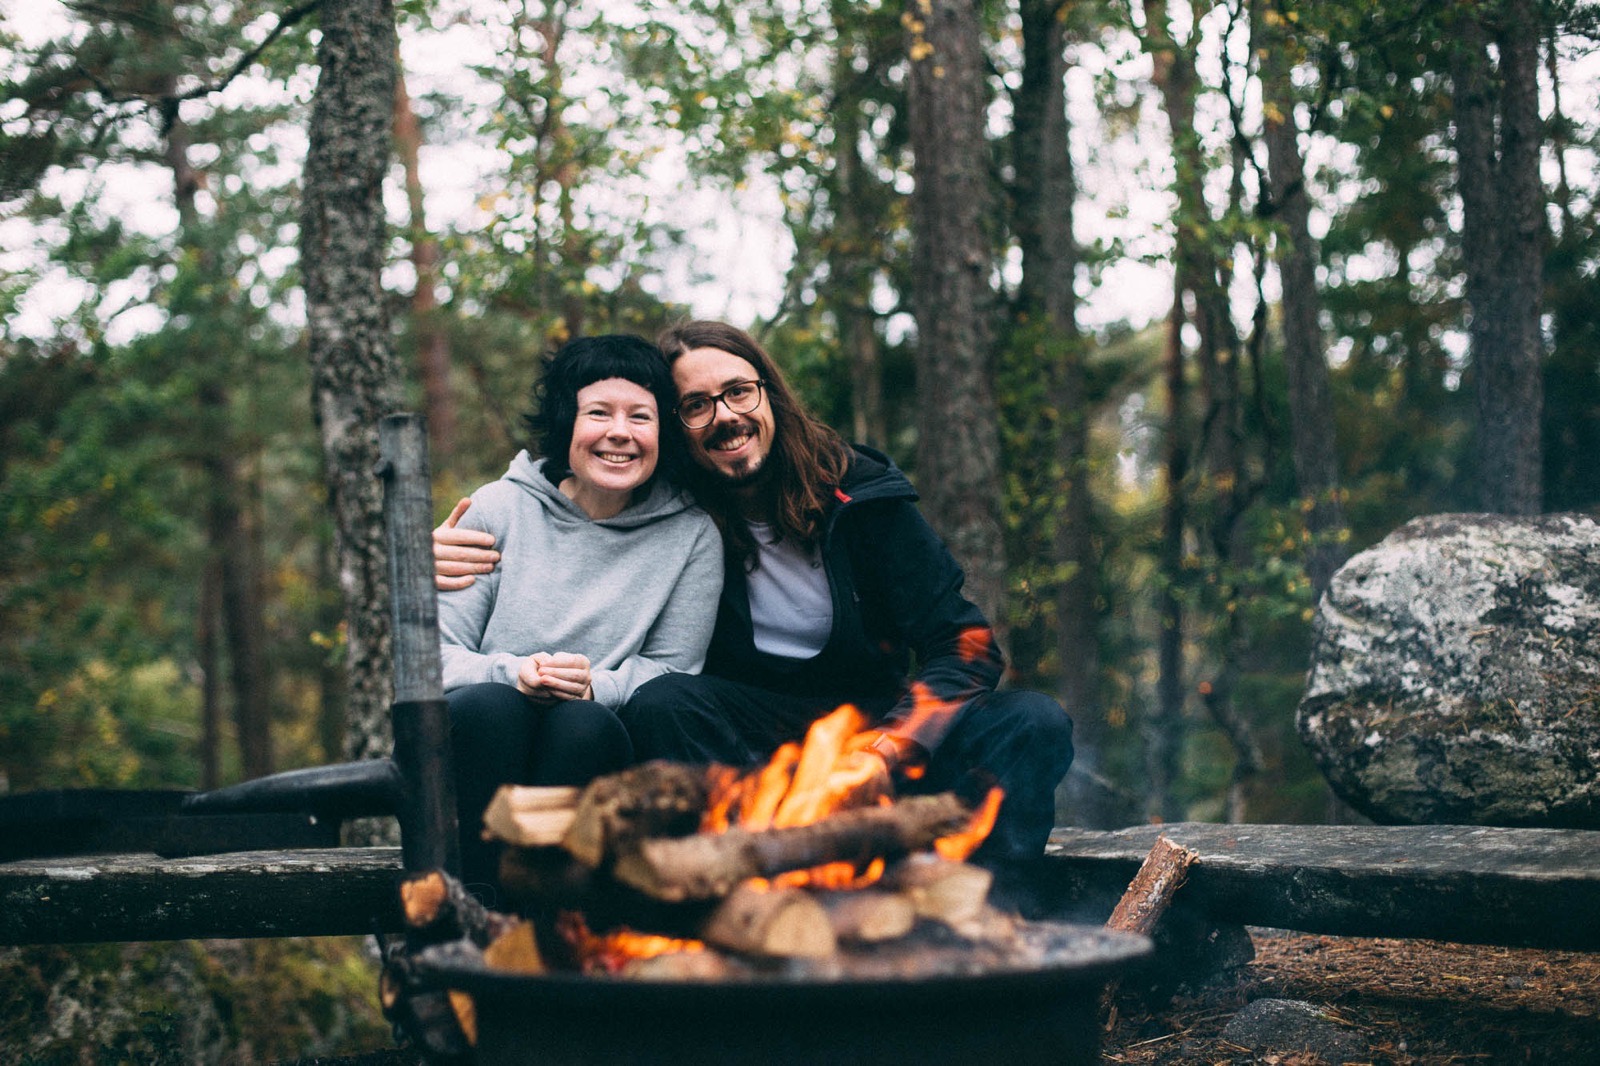 A smiling couple in a forest. Resting on a log close to a campfire.